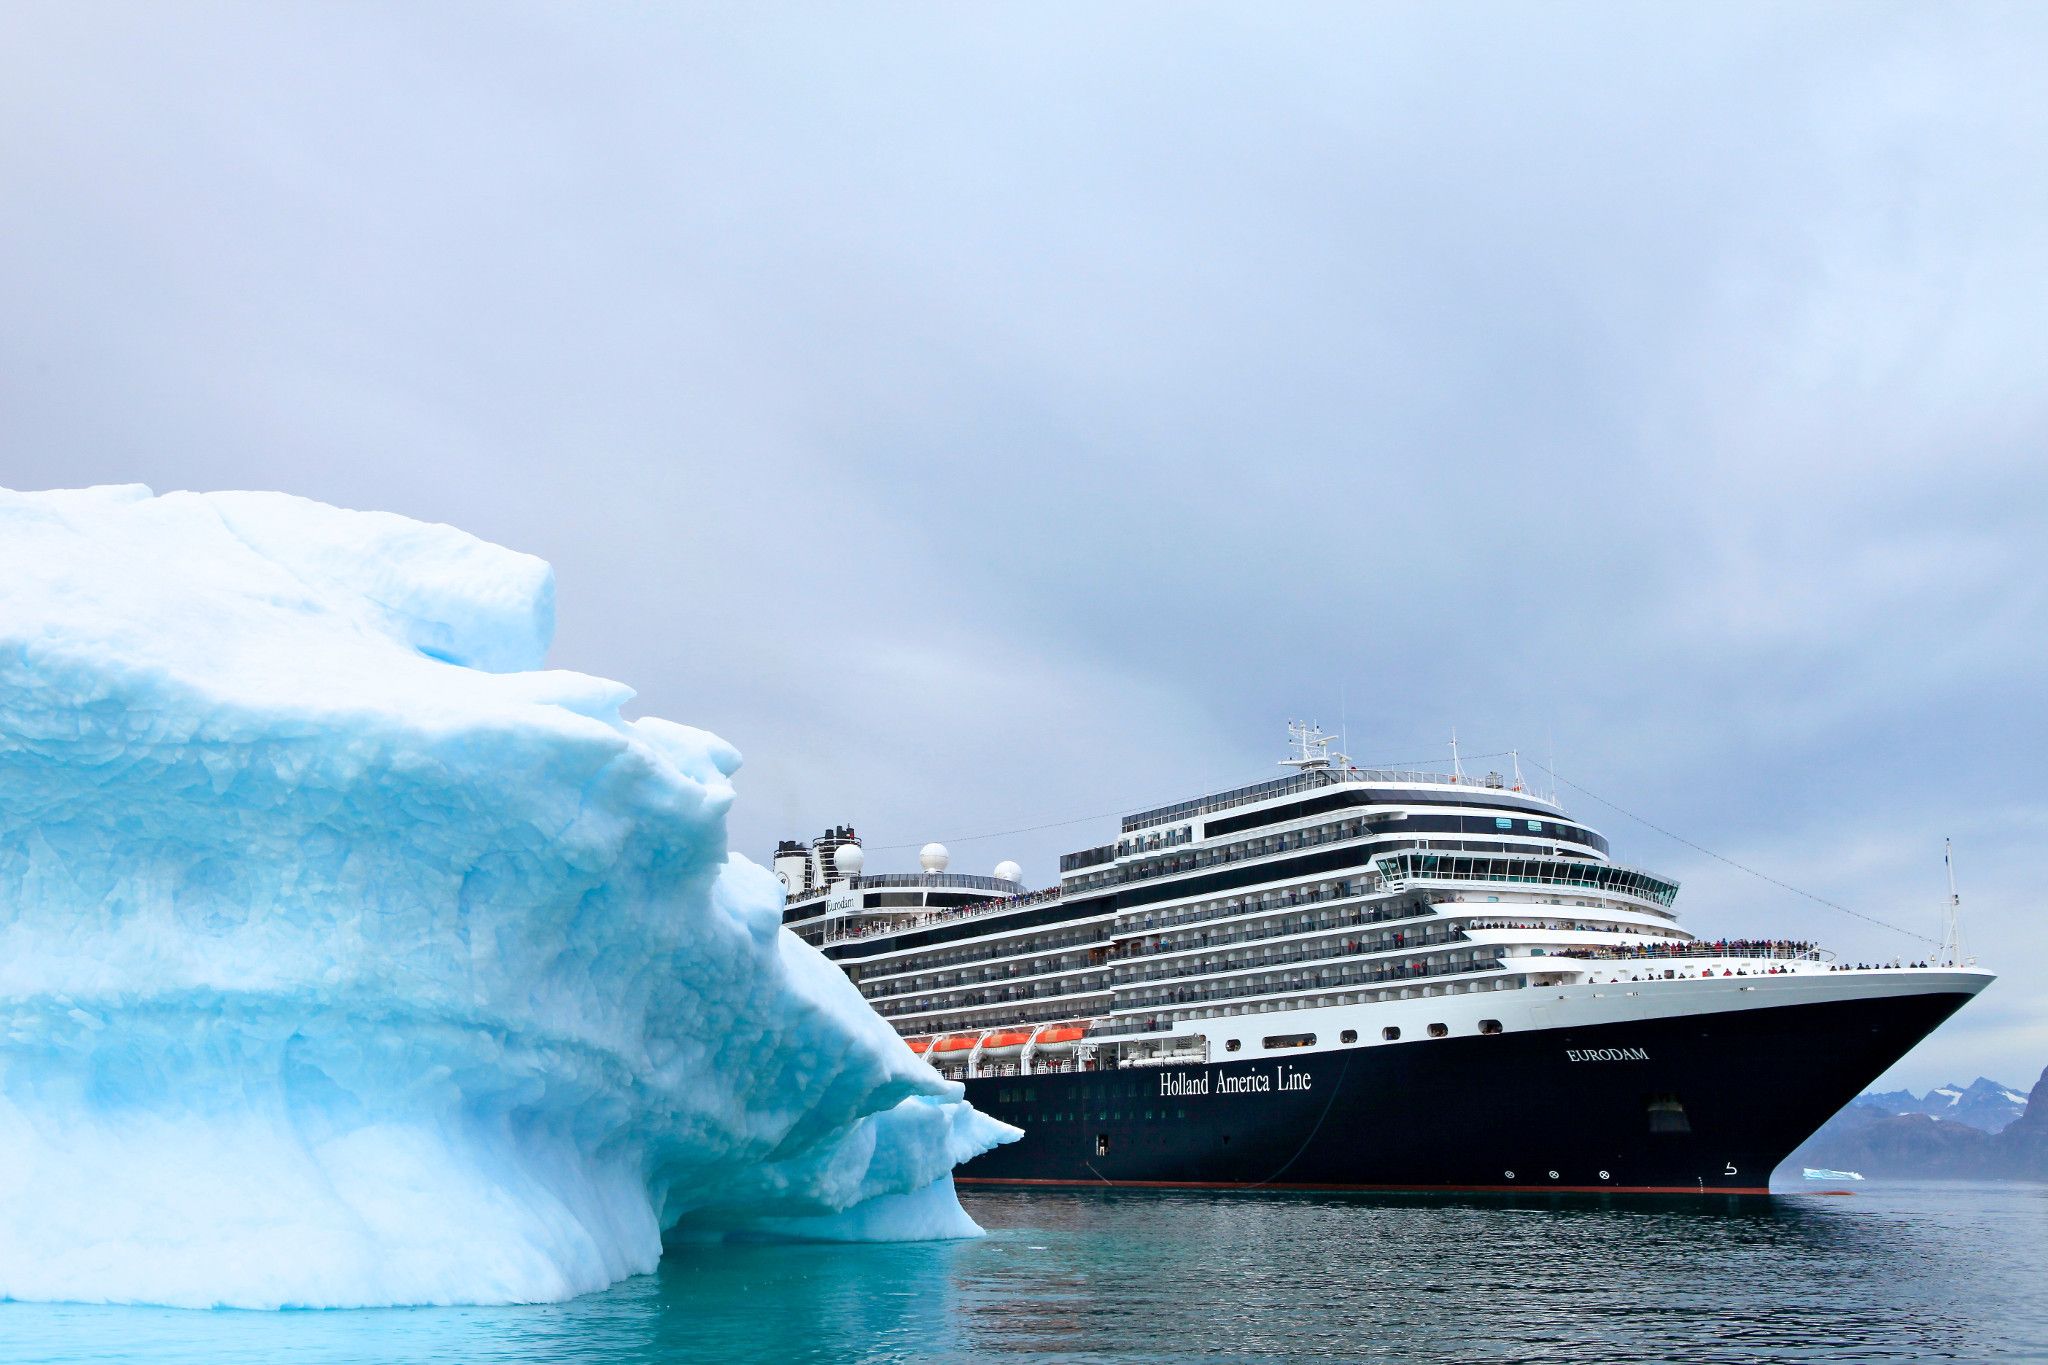 Holland America Line Announces First Grand Voyage ‘PoletoPole’ Cruise